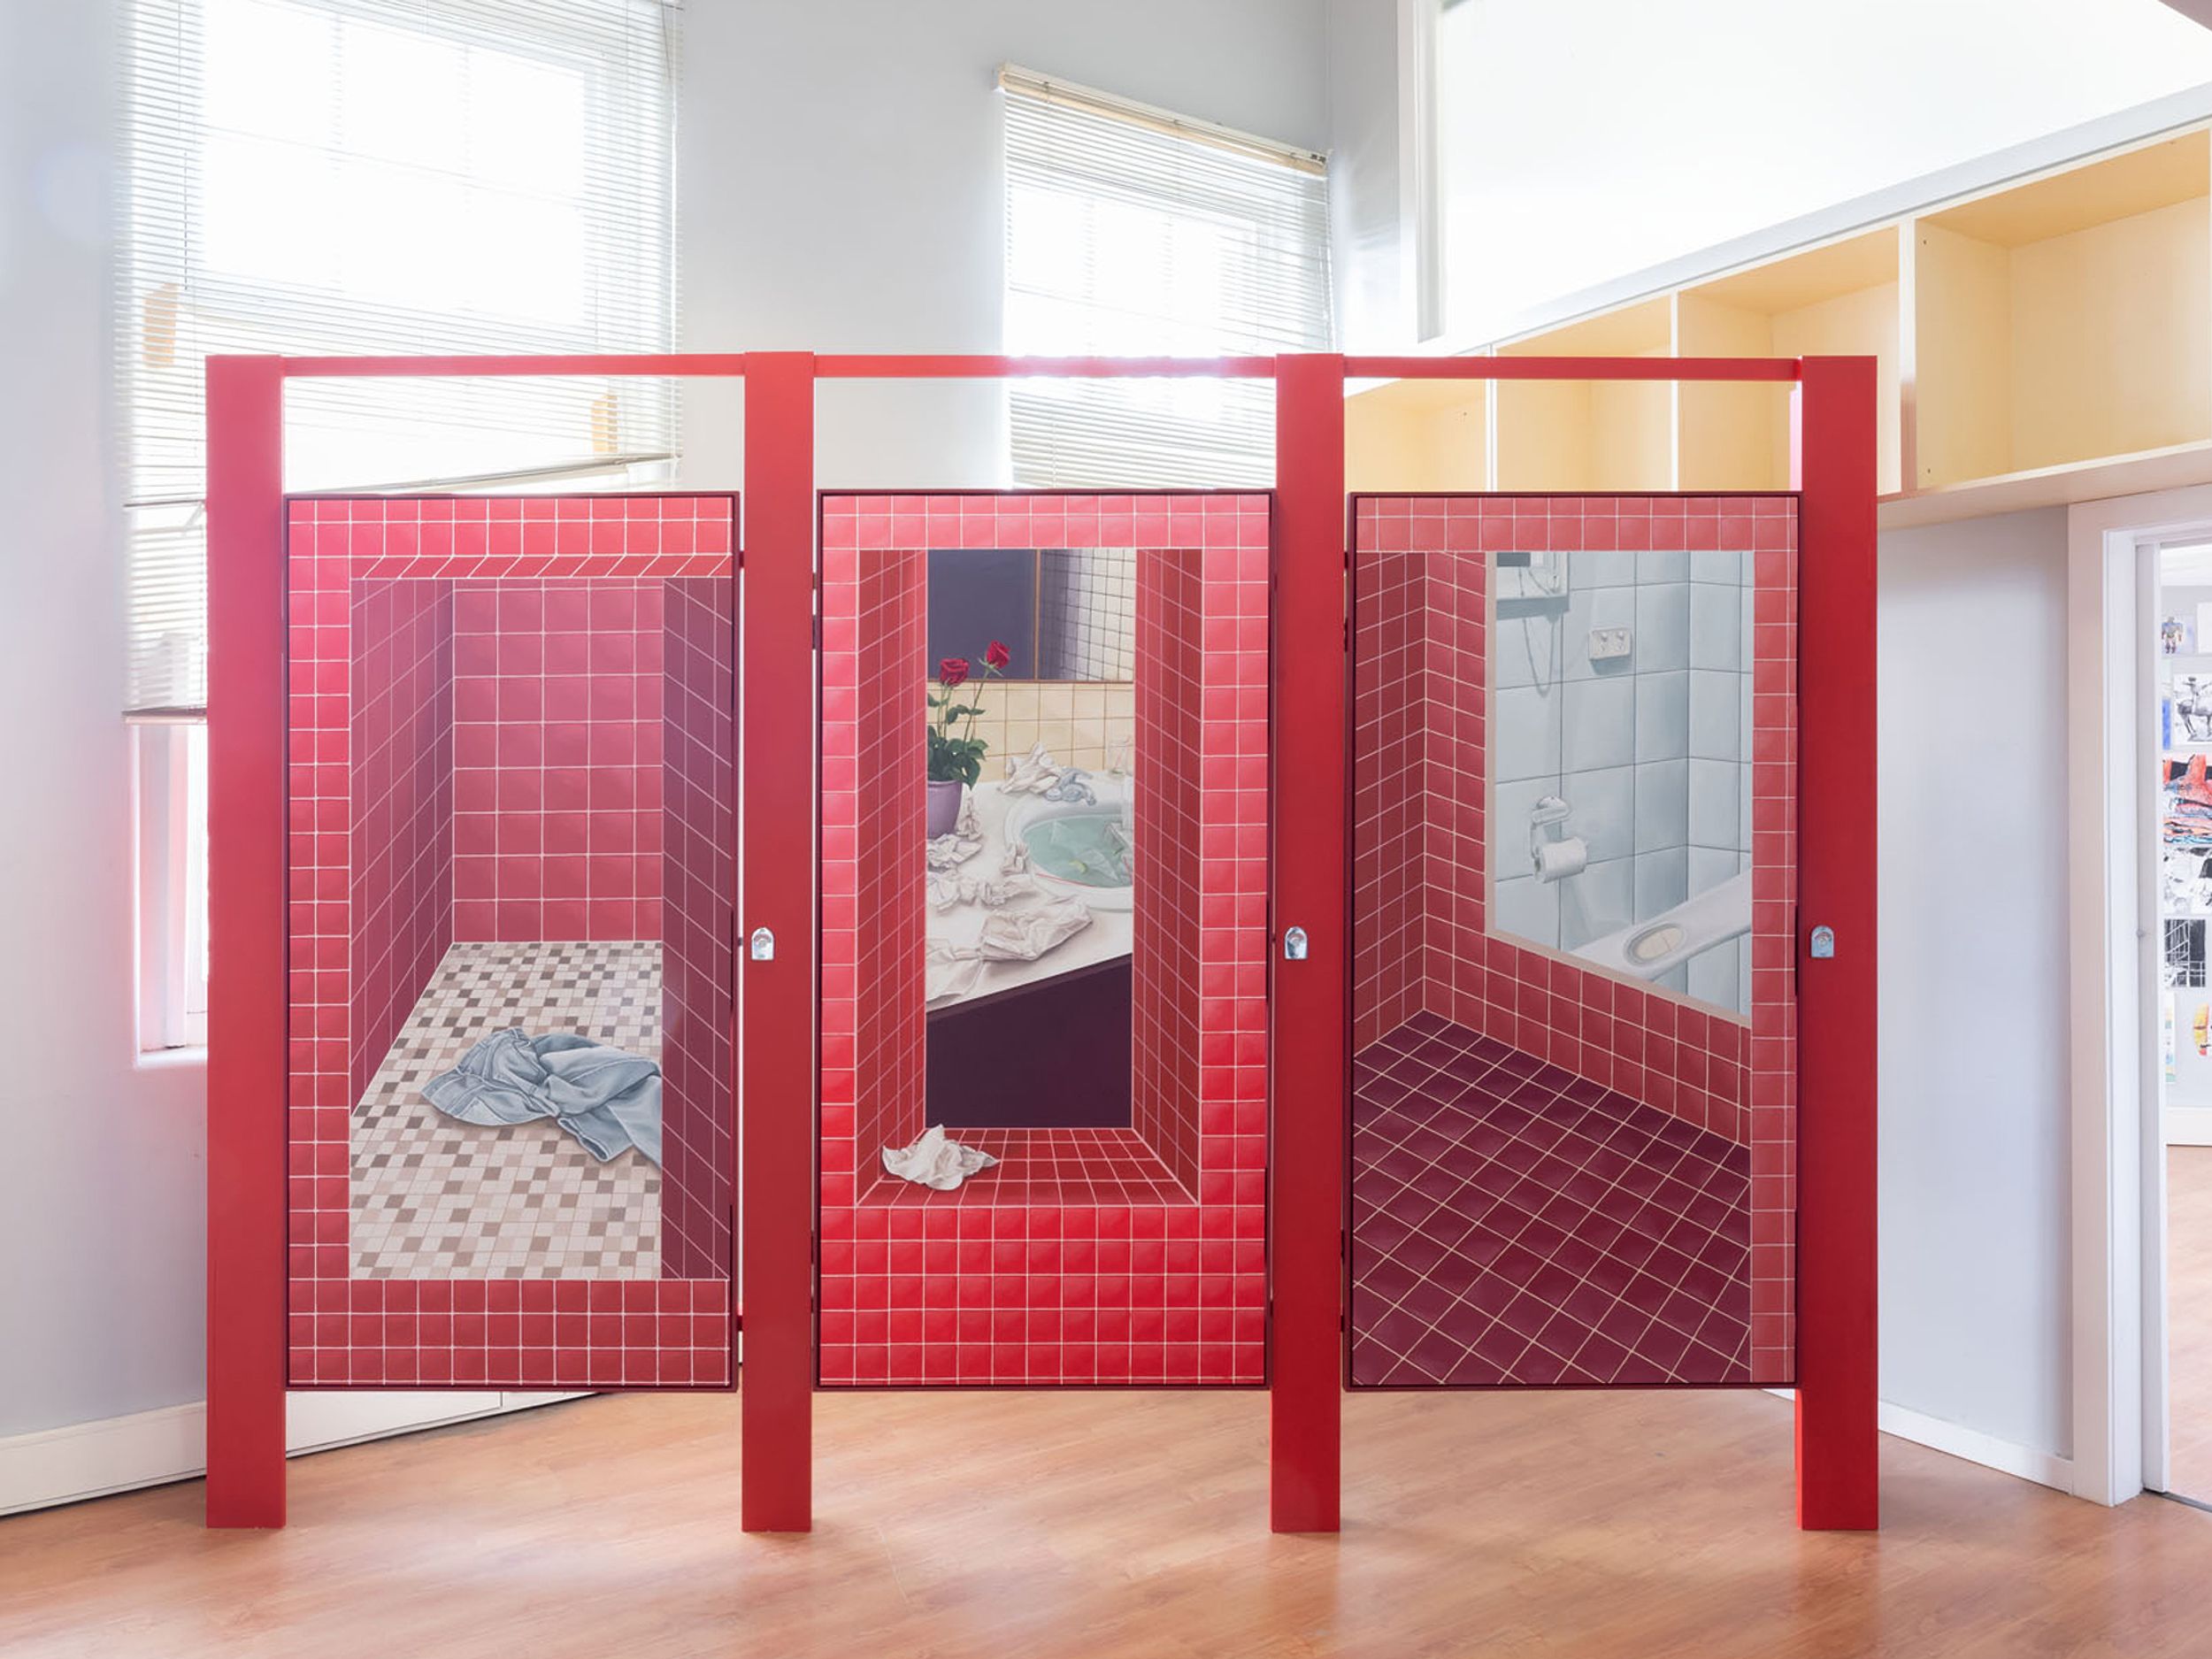 Artwork of three red tiled stalls with illustrations of bathrooms